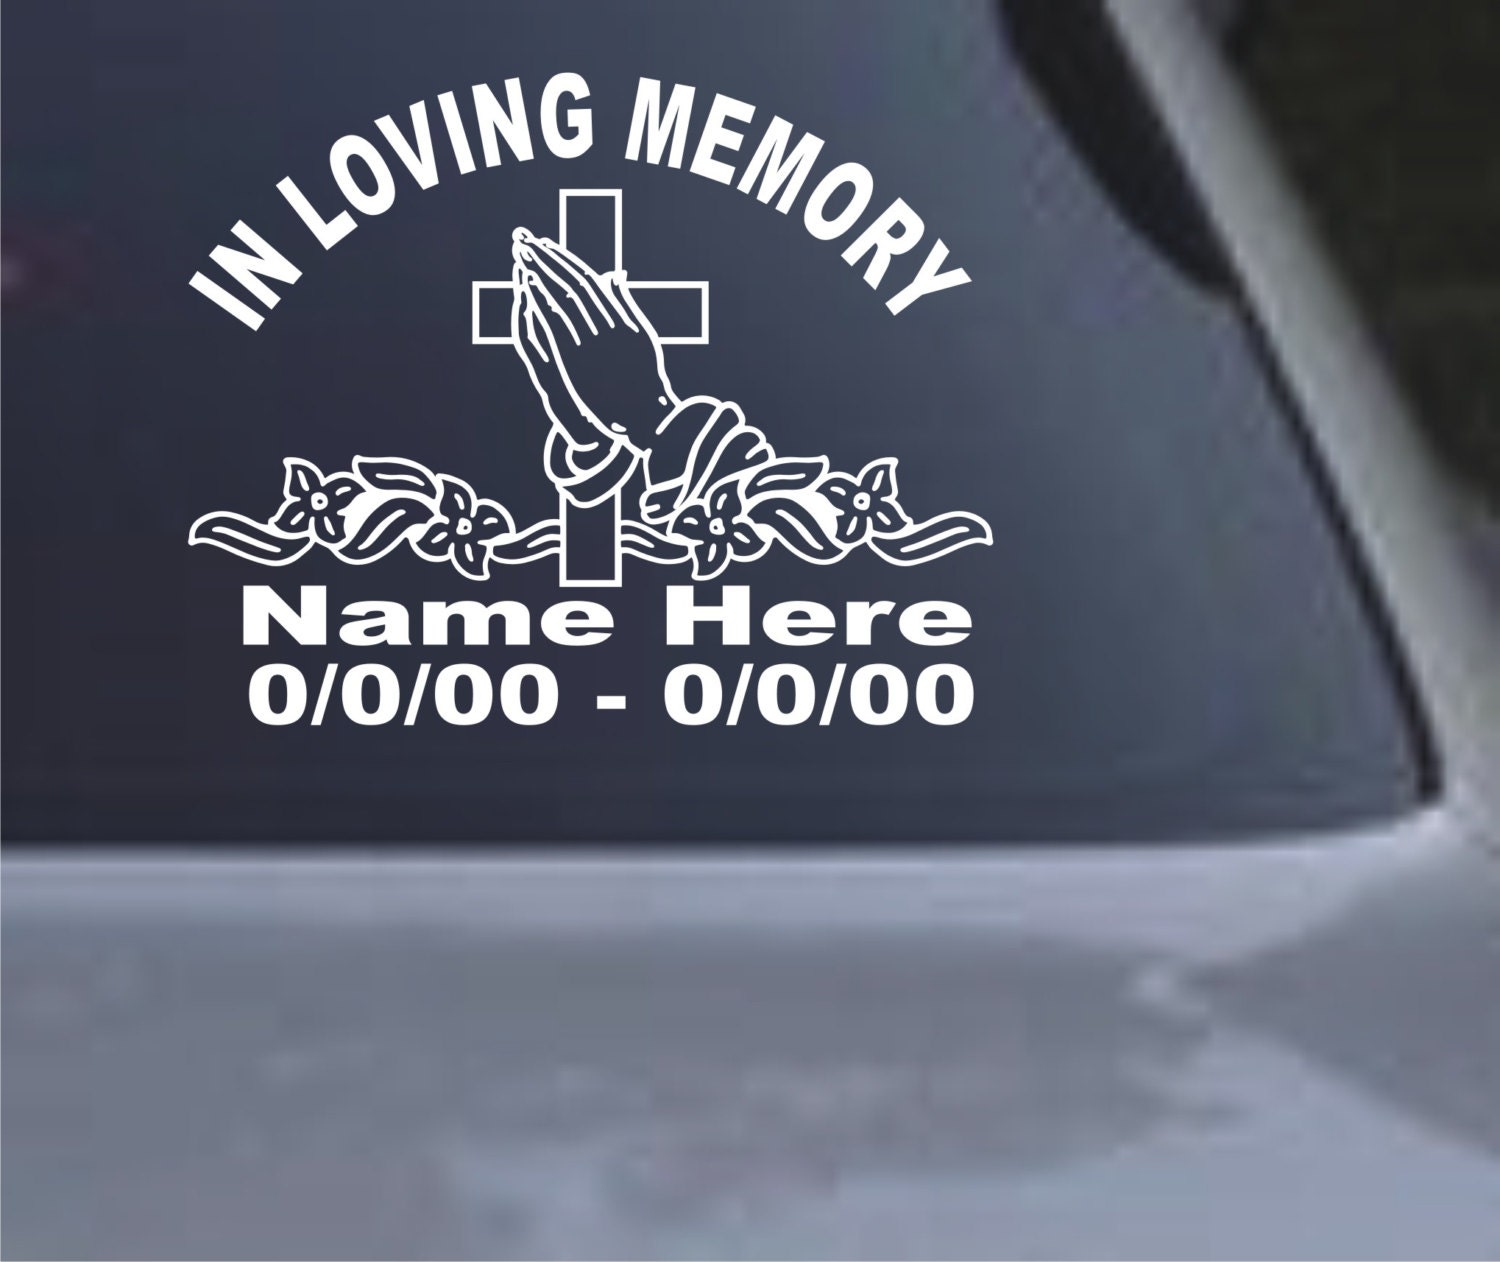 in loving memory picture vehicle stickers